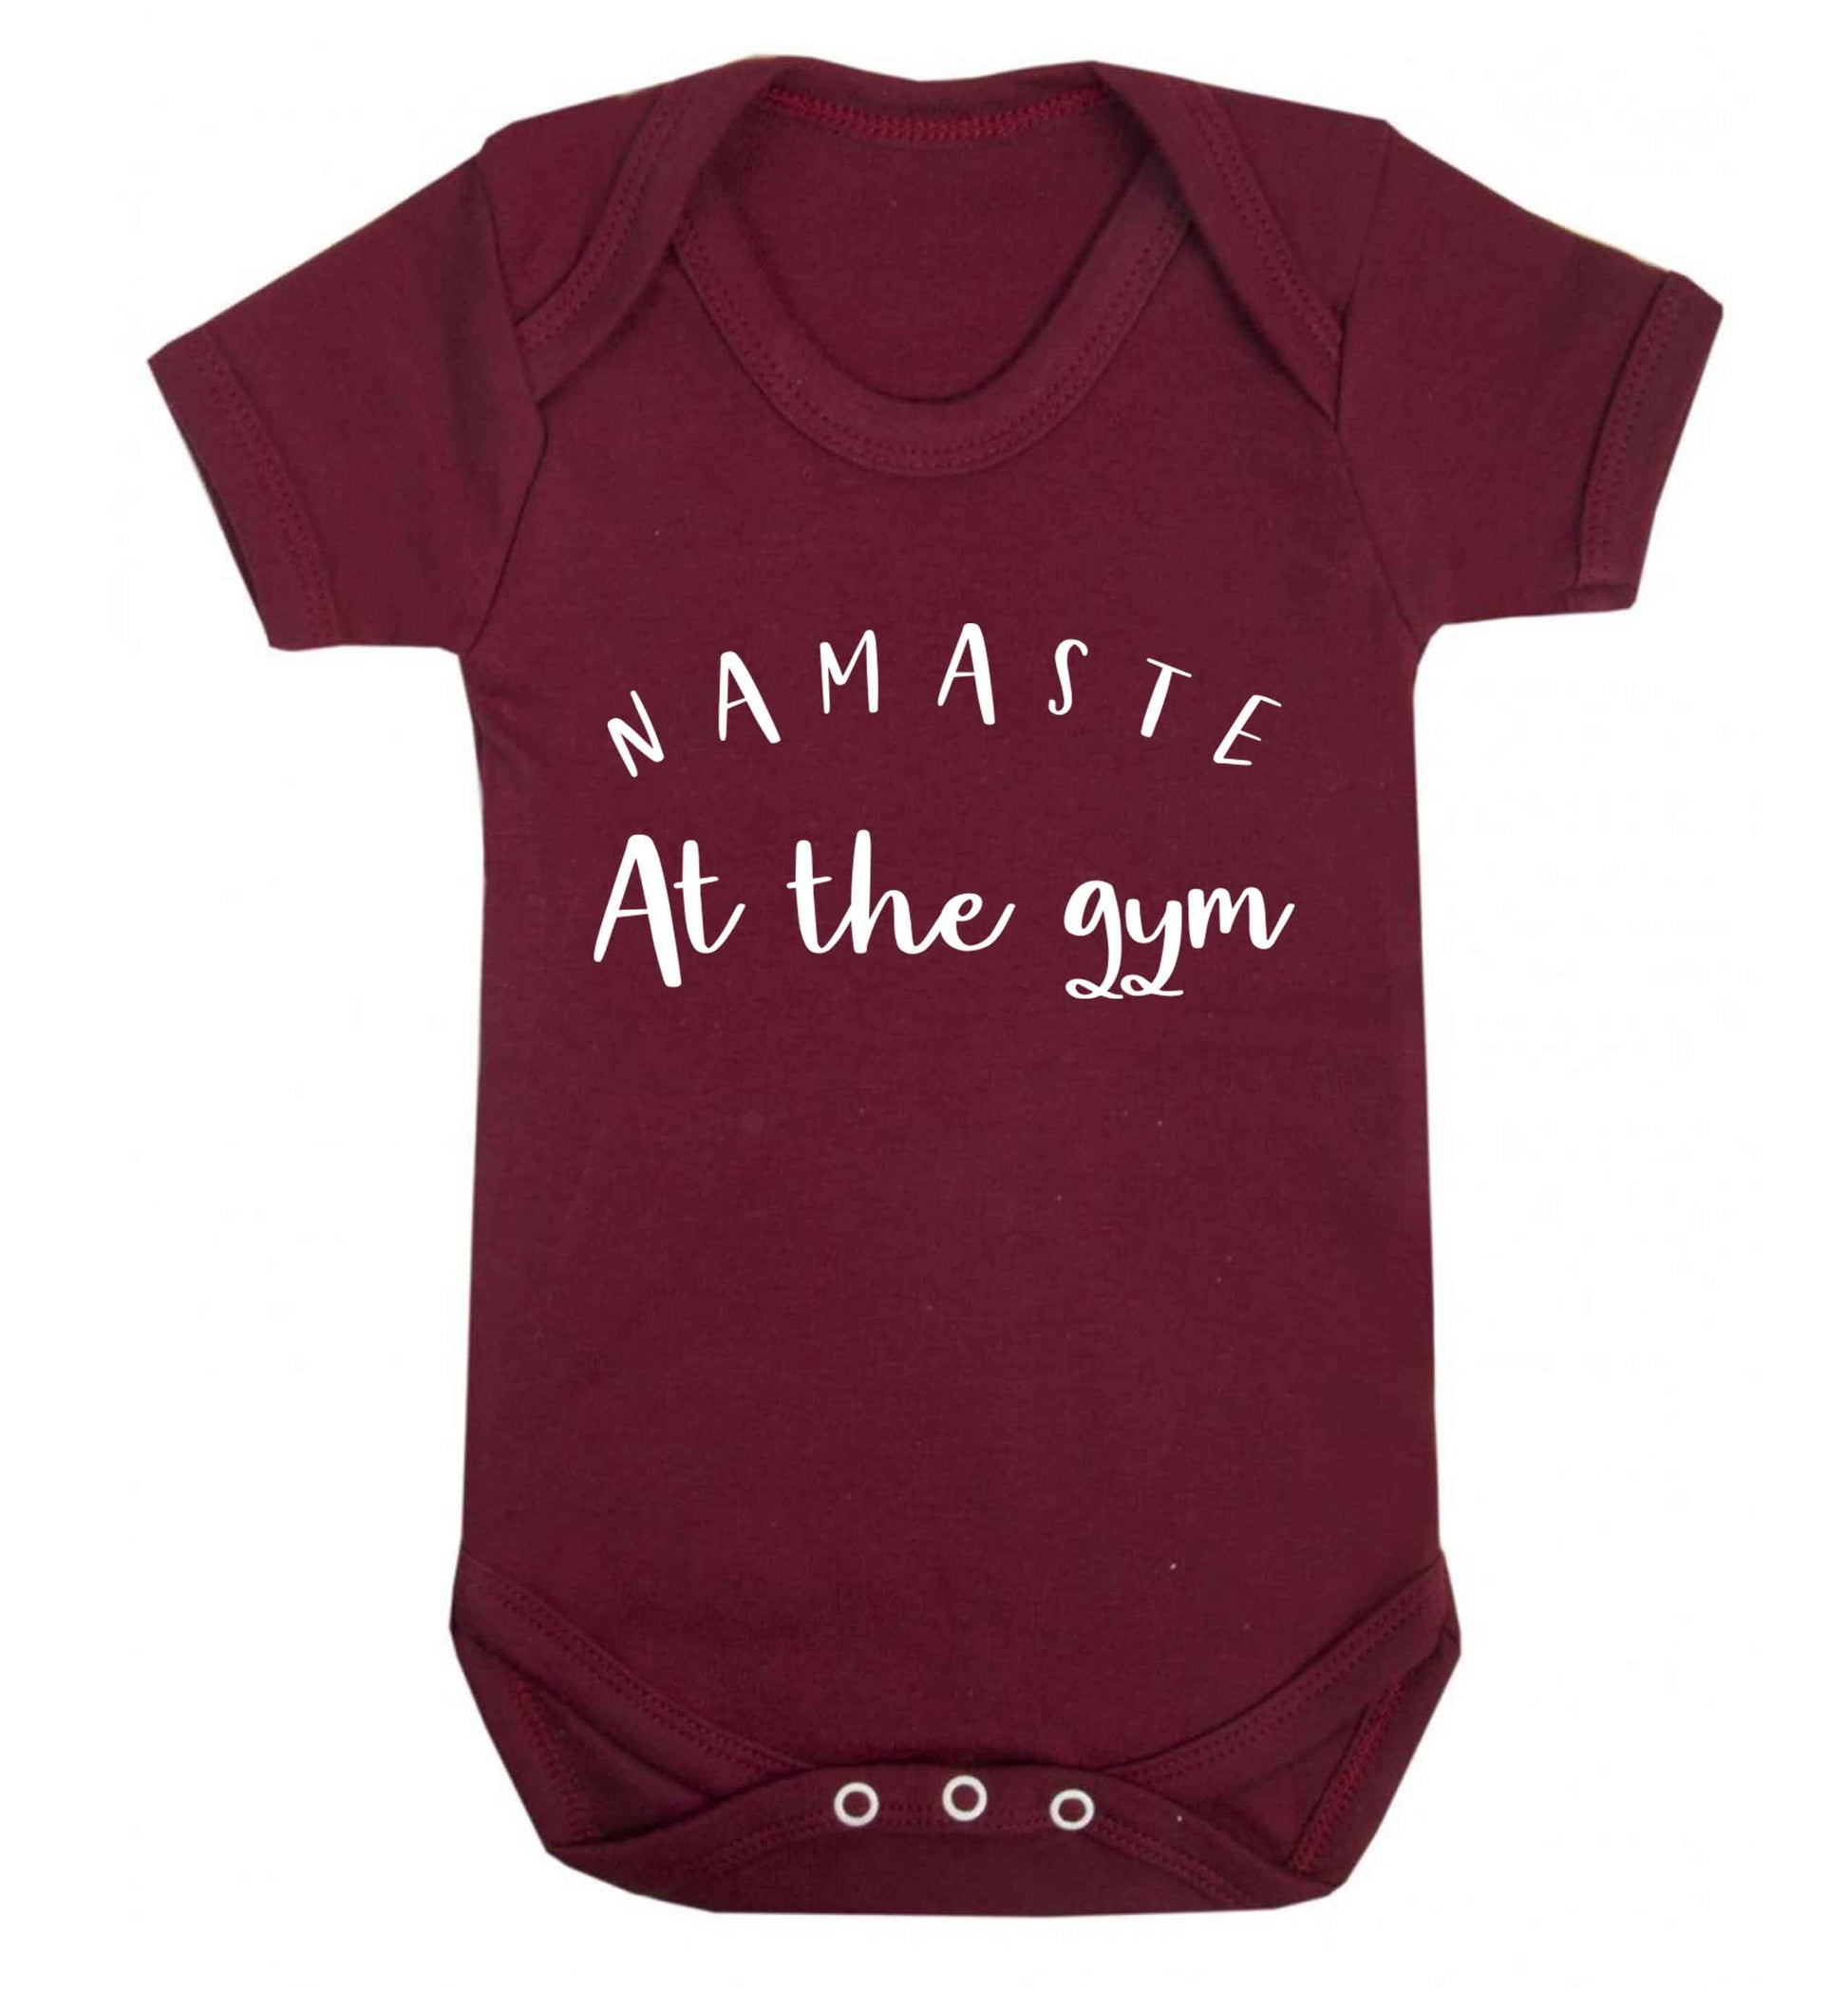 Namaste at the gym Baby Vest maroon 18-24 months